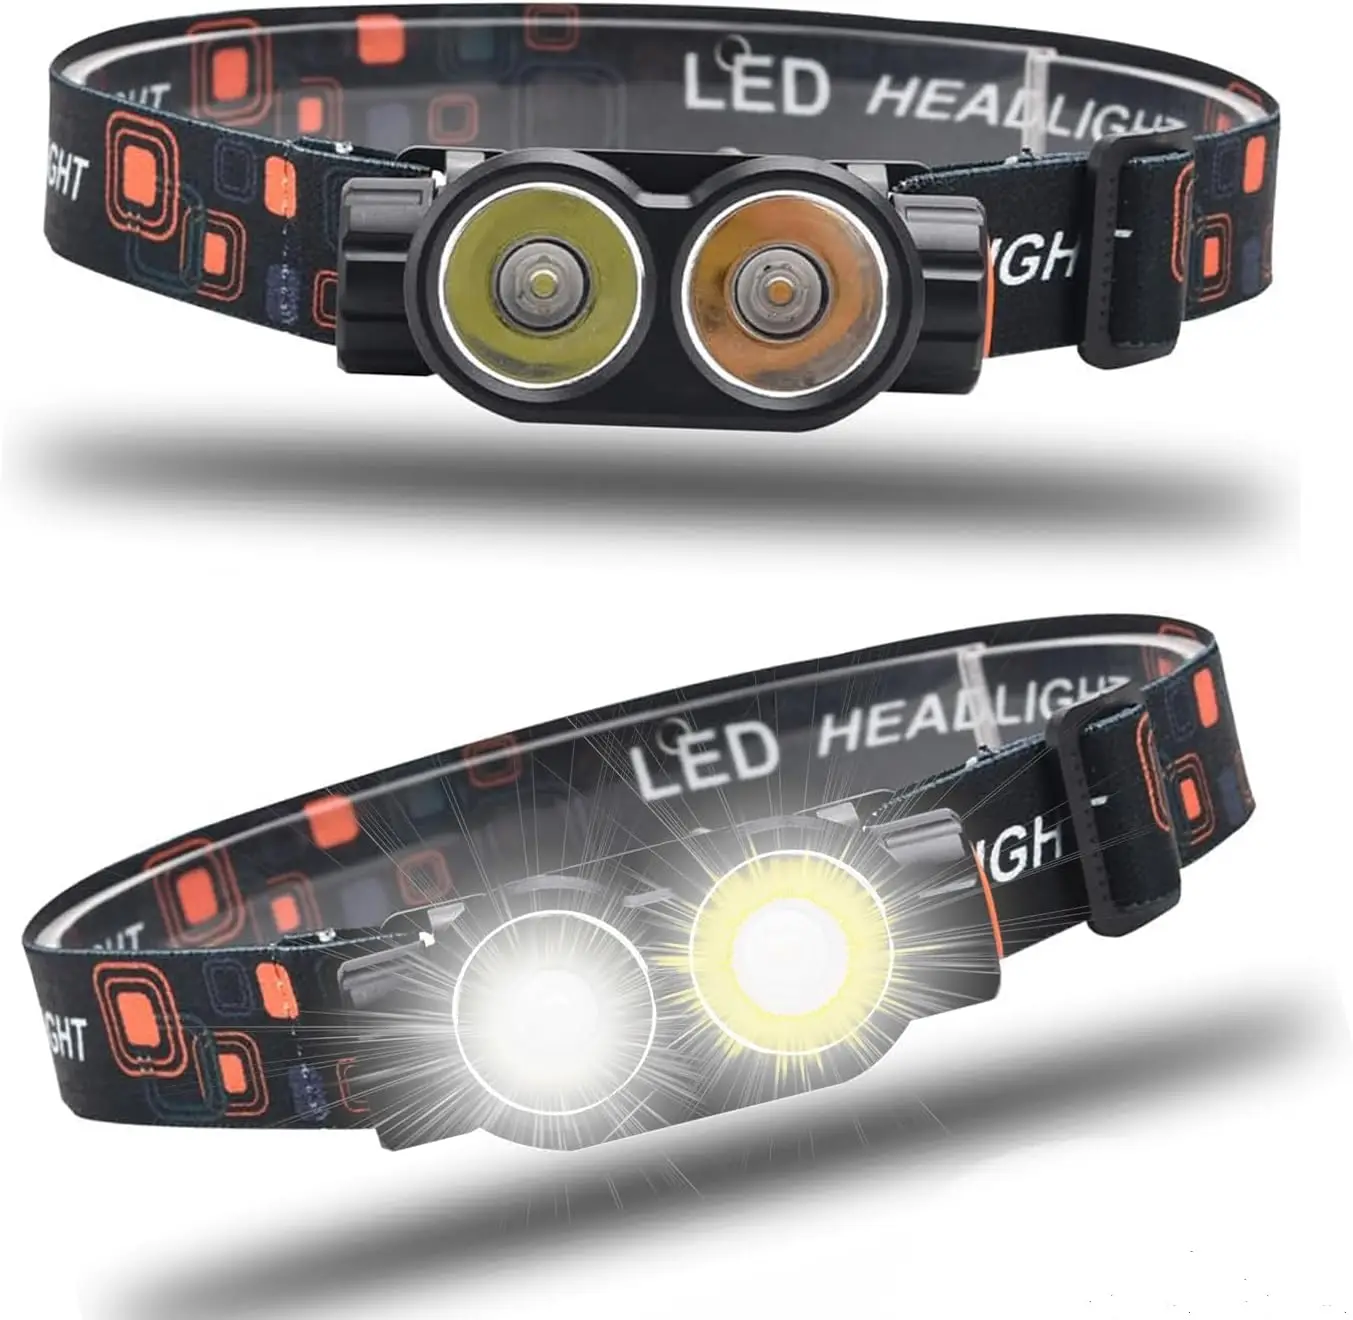 

USB Rechargeable LED Headlamp Long-Range Double Headlight Bright Light Head Torch Outdoor Emergency Lamp Running Fishing Camping